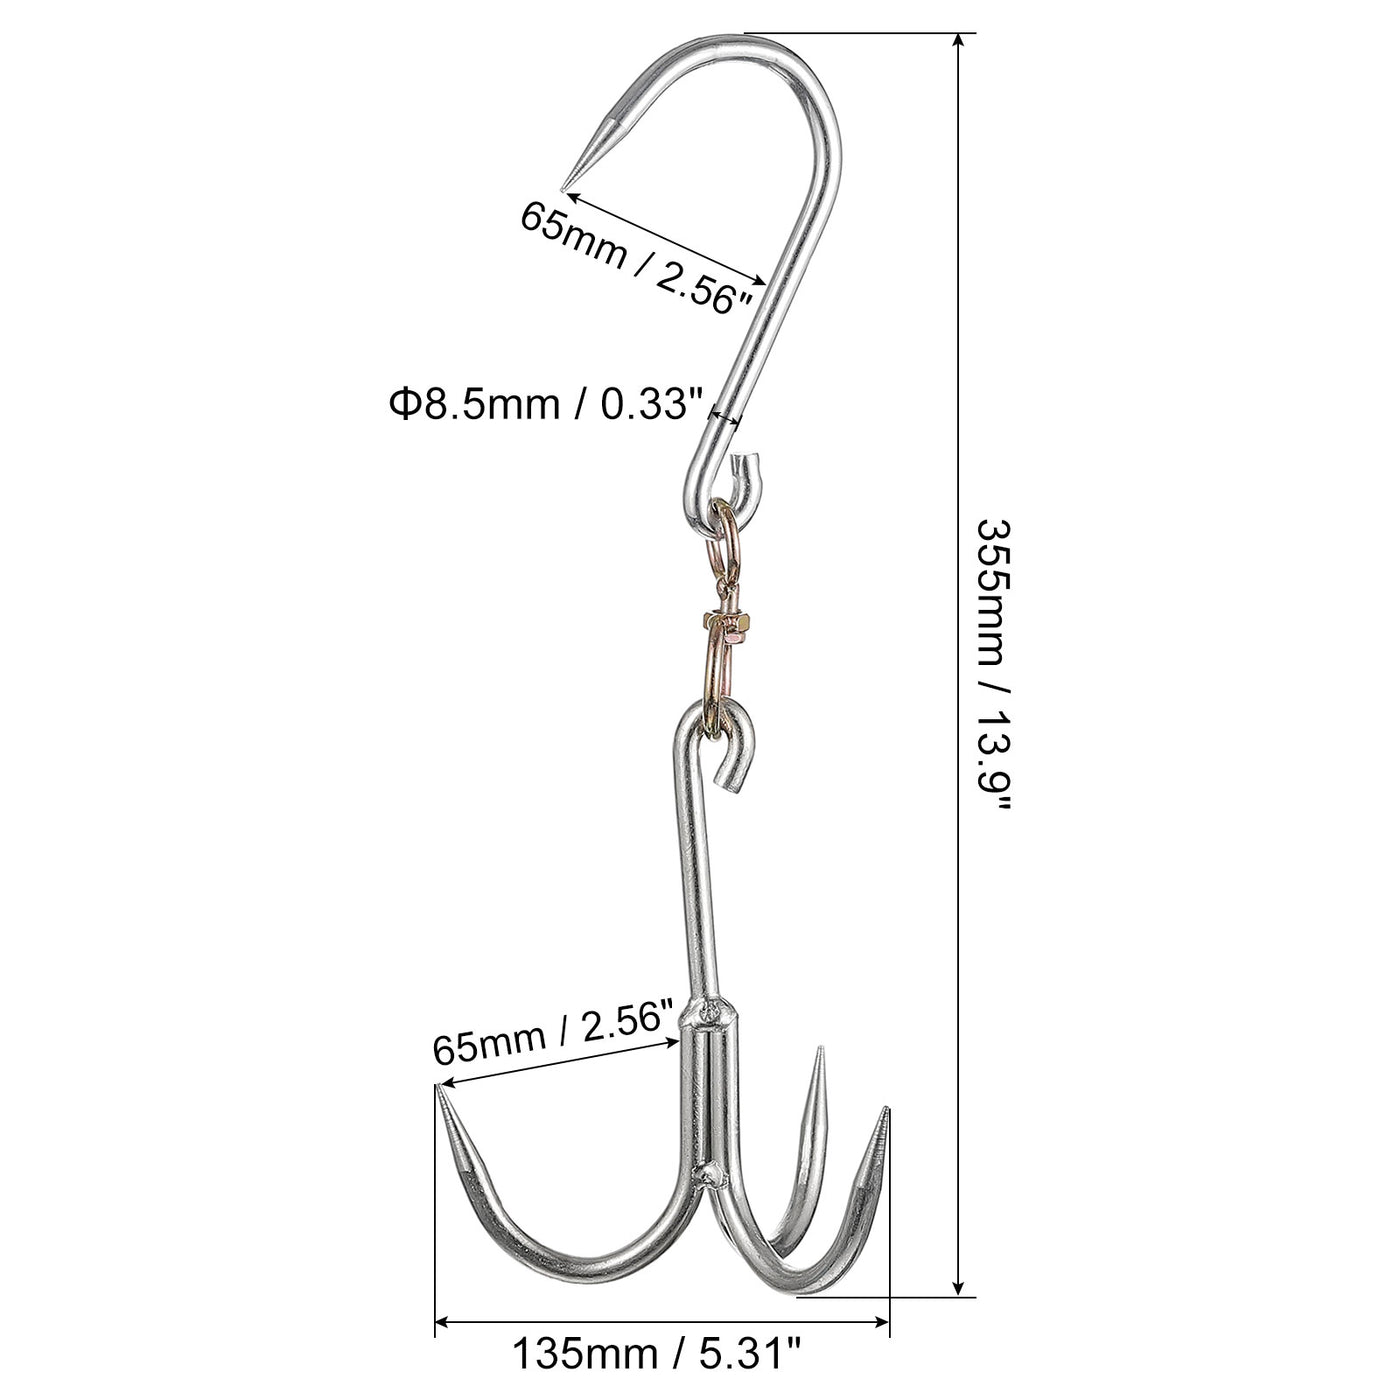 uxcell Uxcell Swiveling Meat Hook, Galvanized Three-Prong Meat Hooks for Hanging Drying Smoking Meat